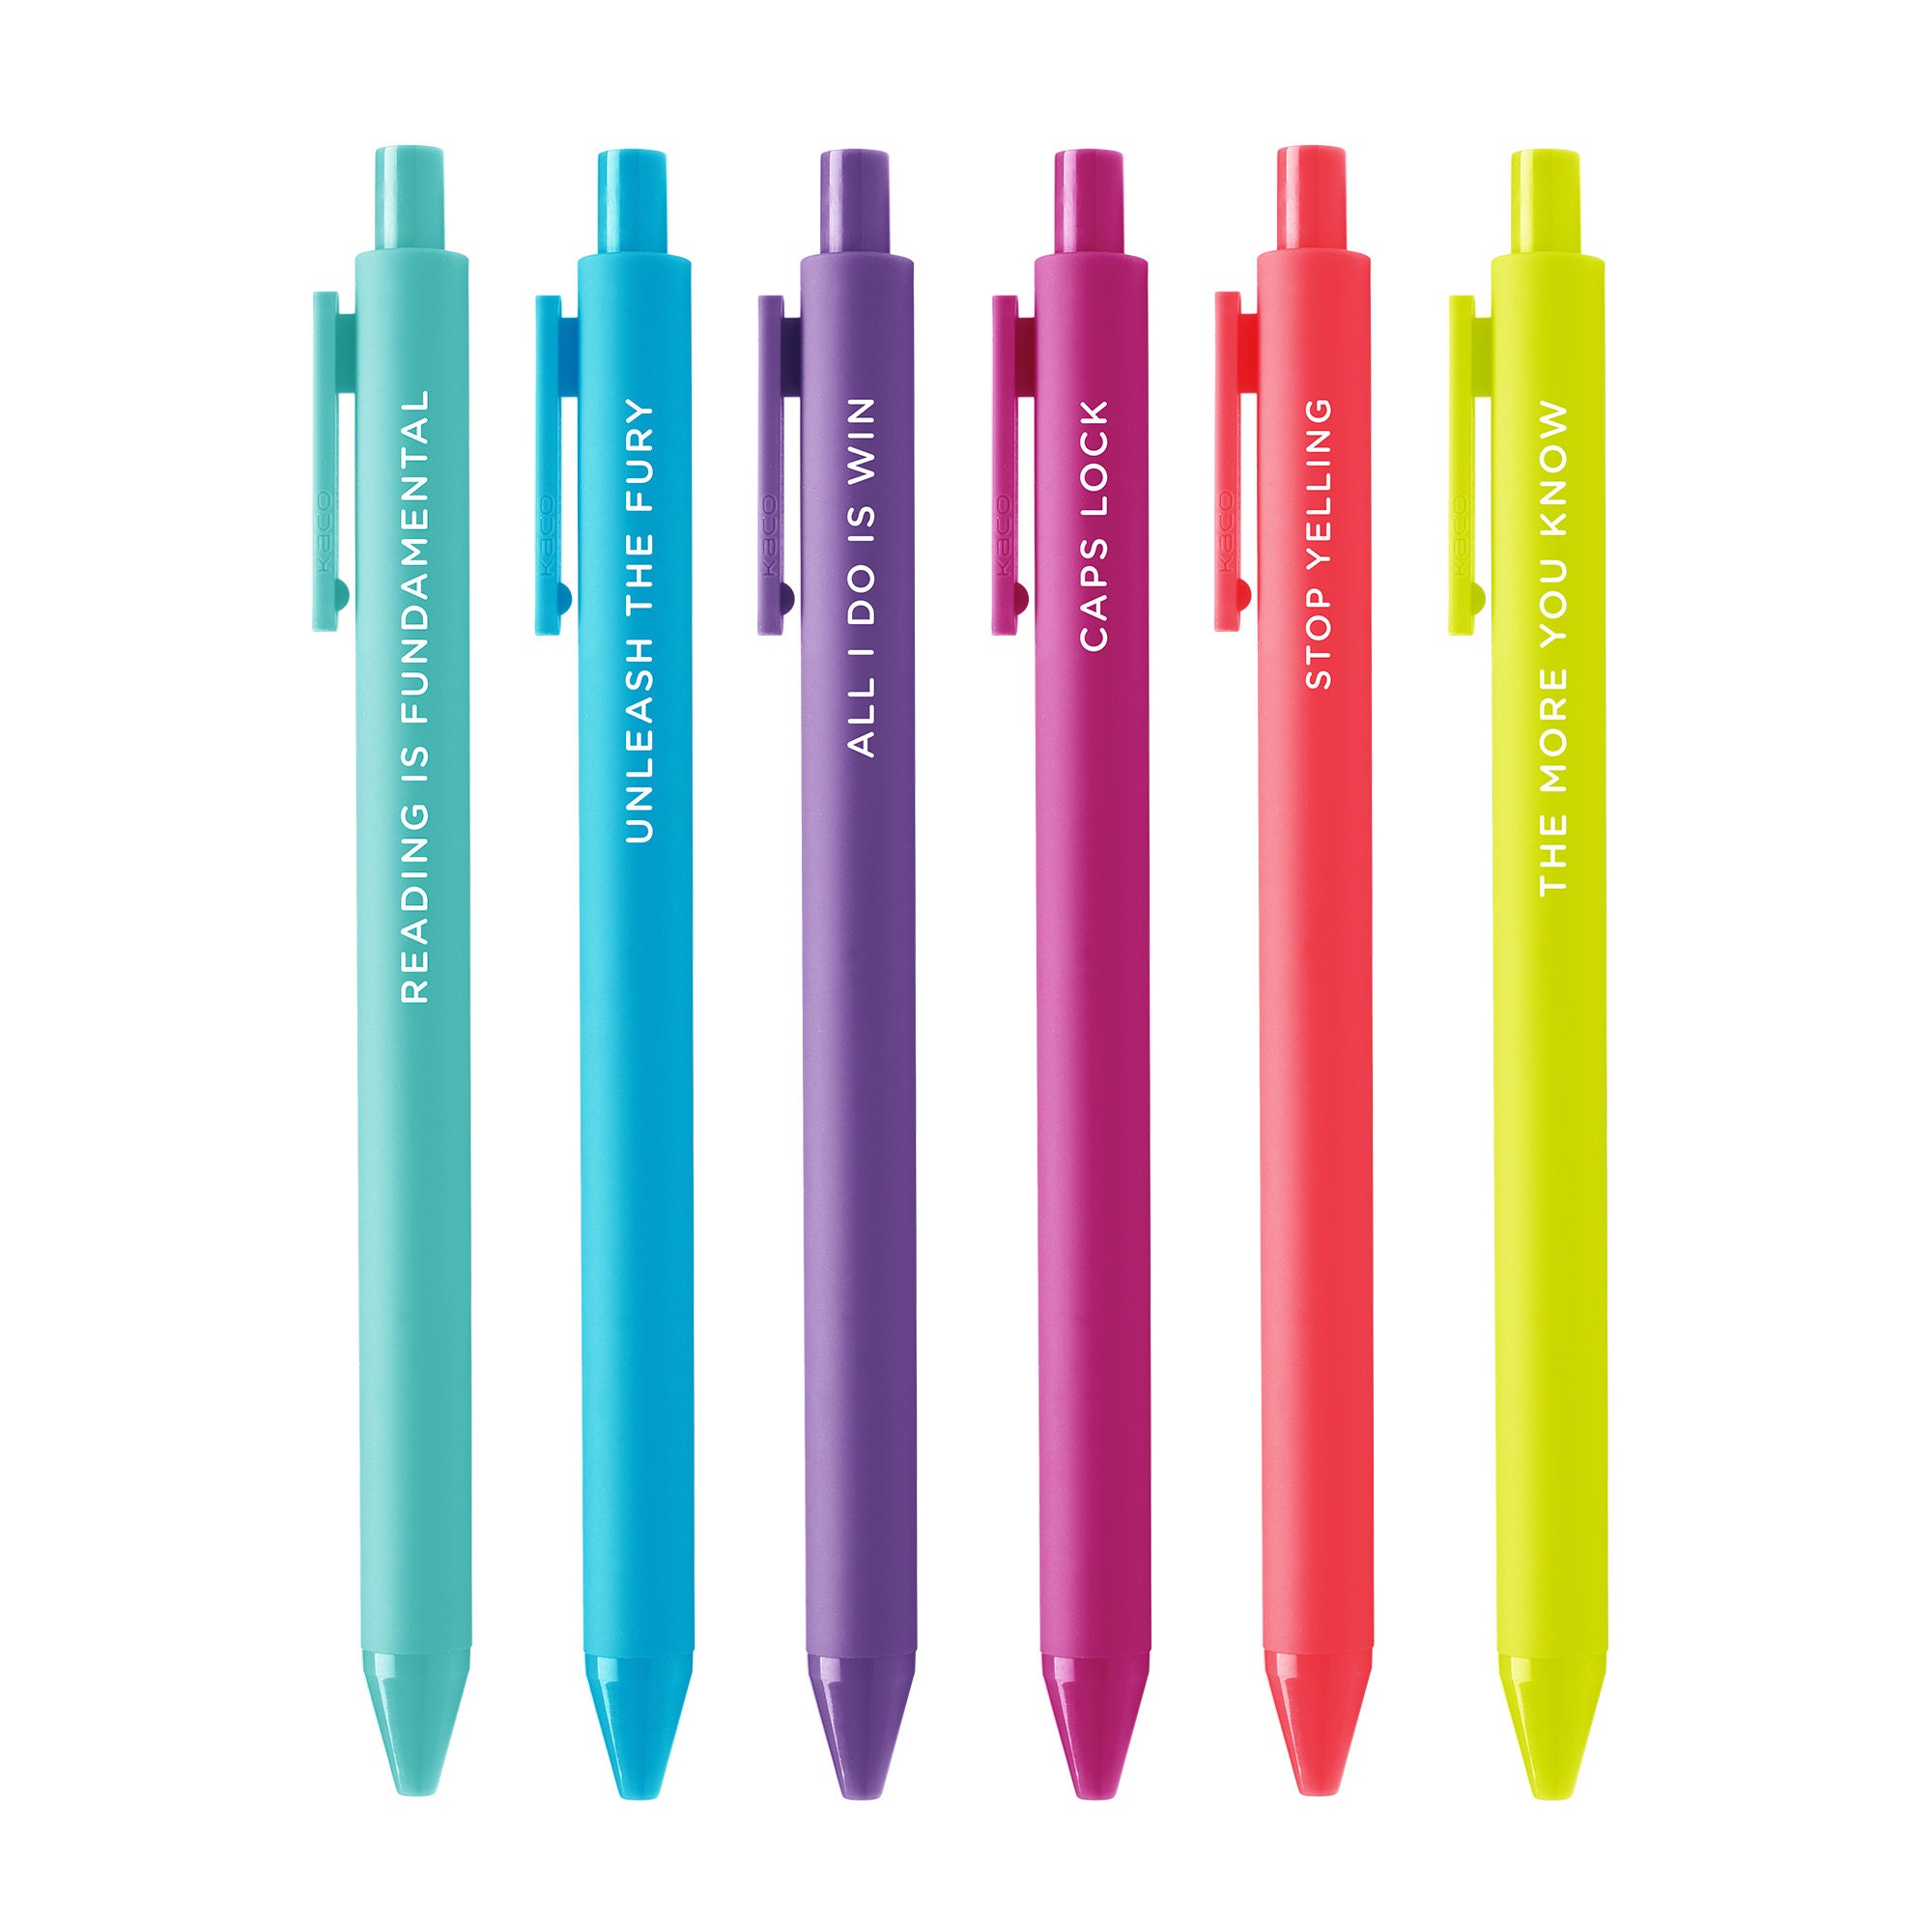 It's like getting 2 pens in 1 with this set of Color-Changing Pens fro